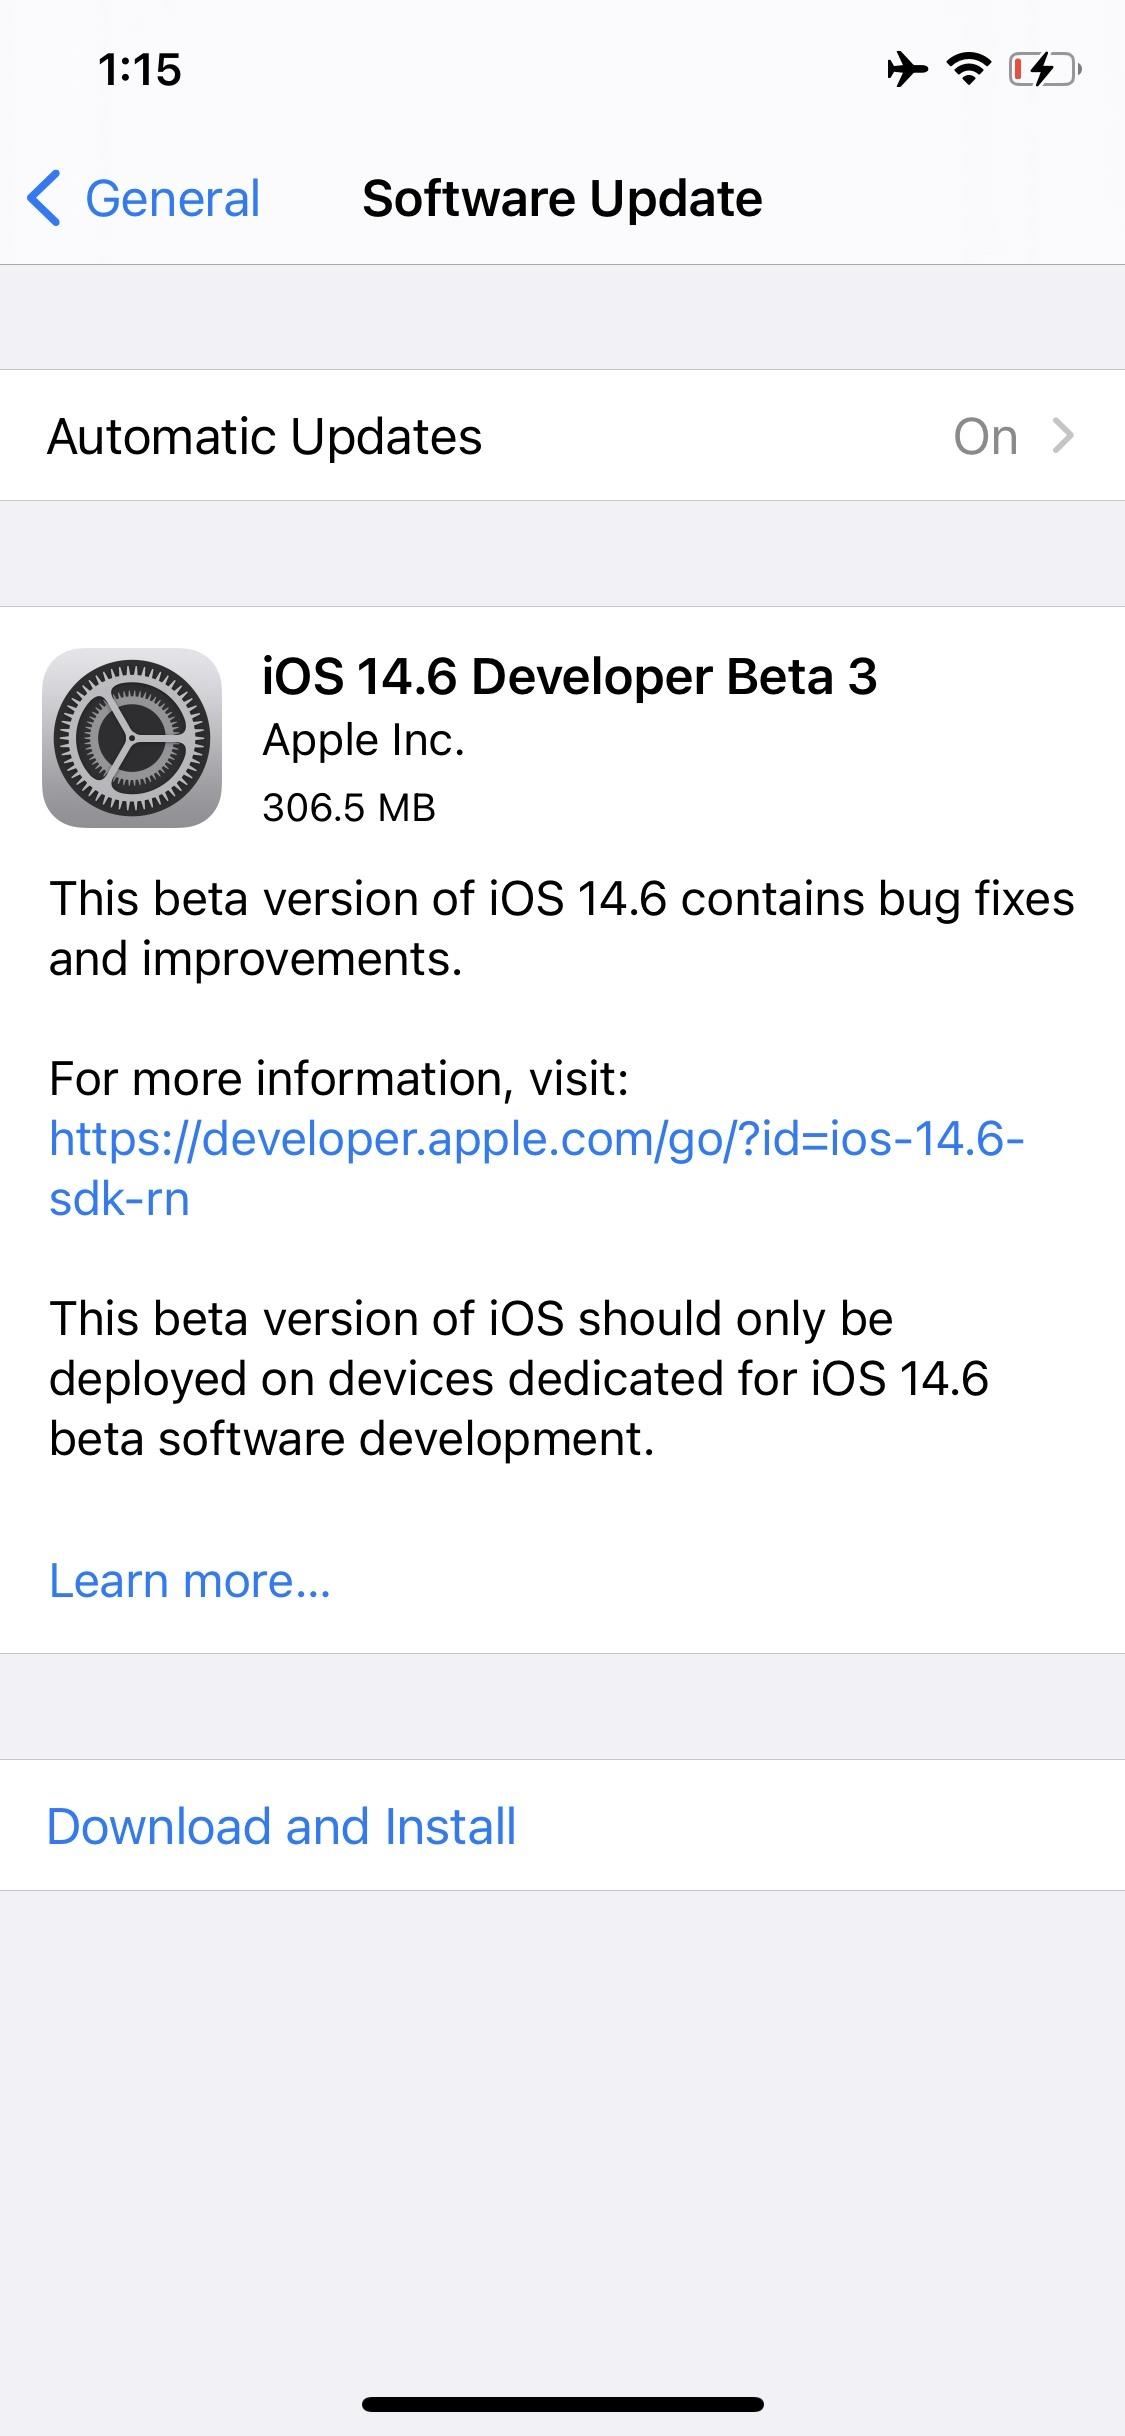 Apple Releases iOS 14.6 Beta 3 for iPhone, Adds Fix for Performance Bug